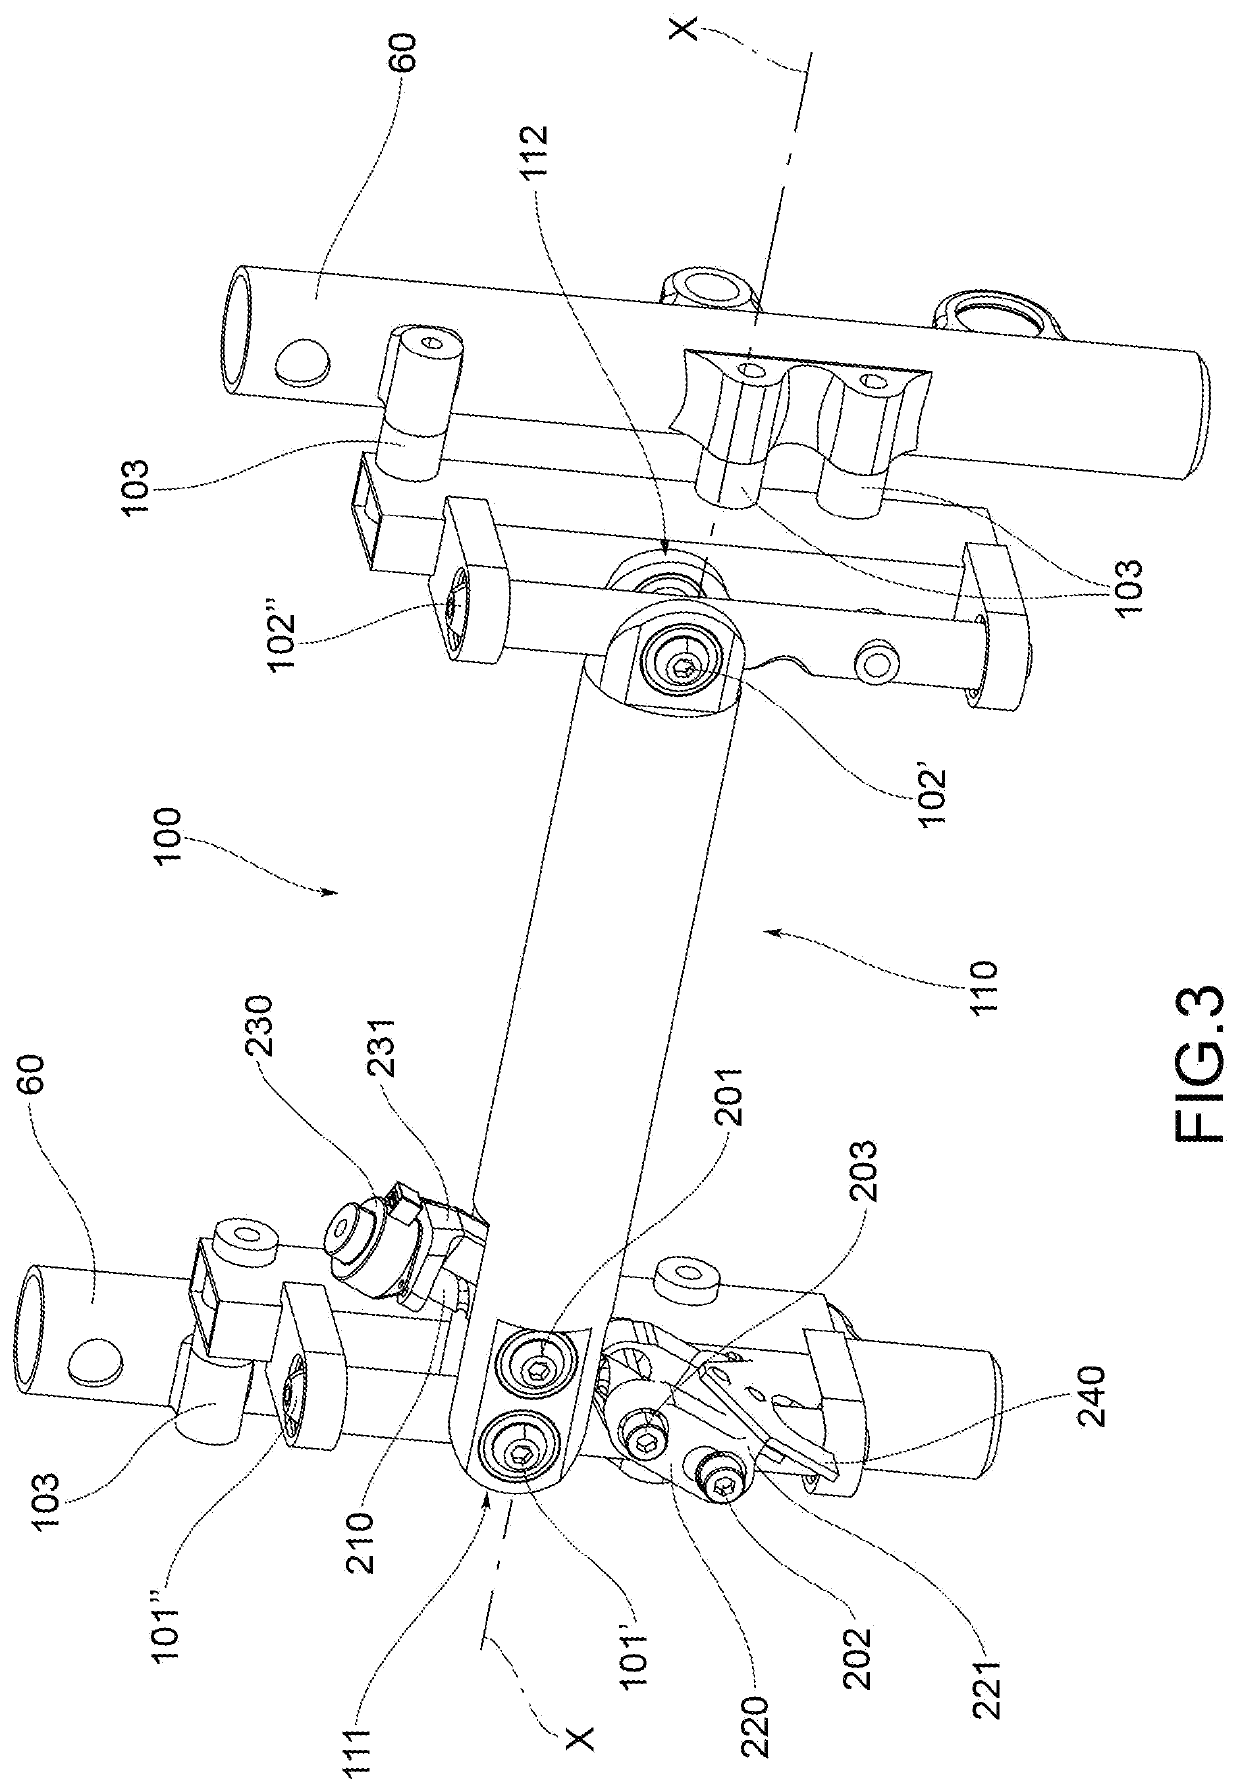 Forecarriage of a rolling motor vehicle with rolling block